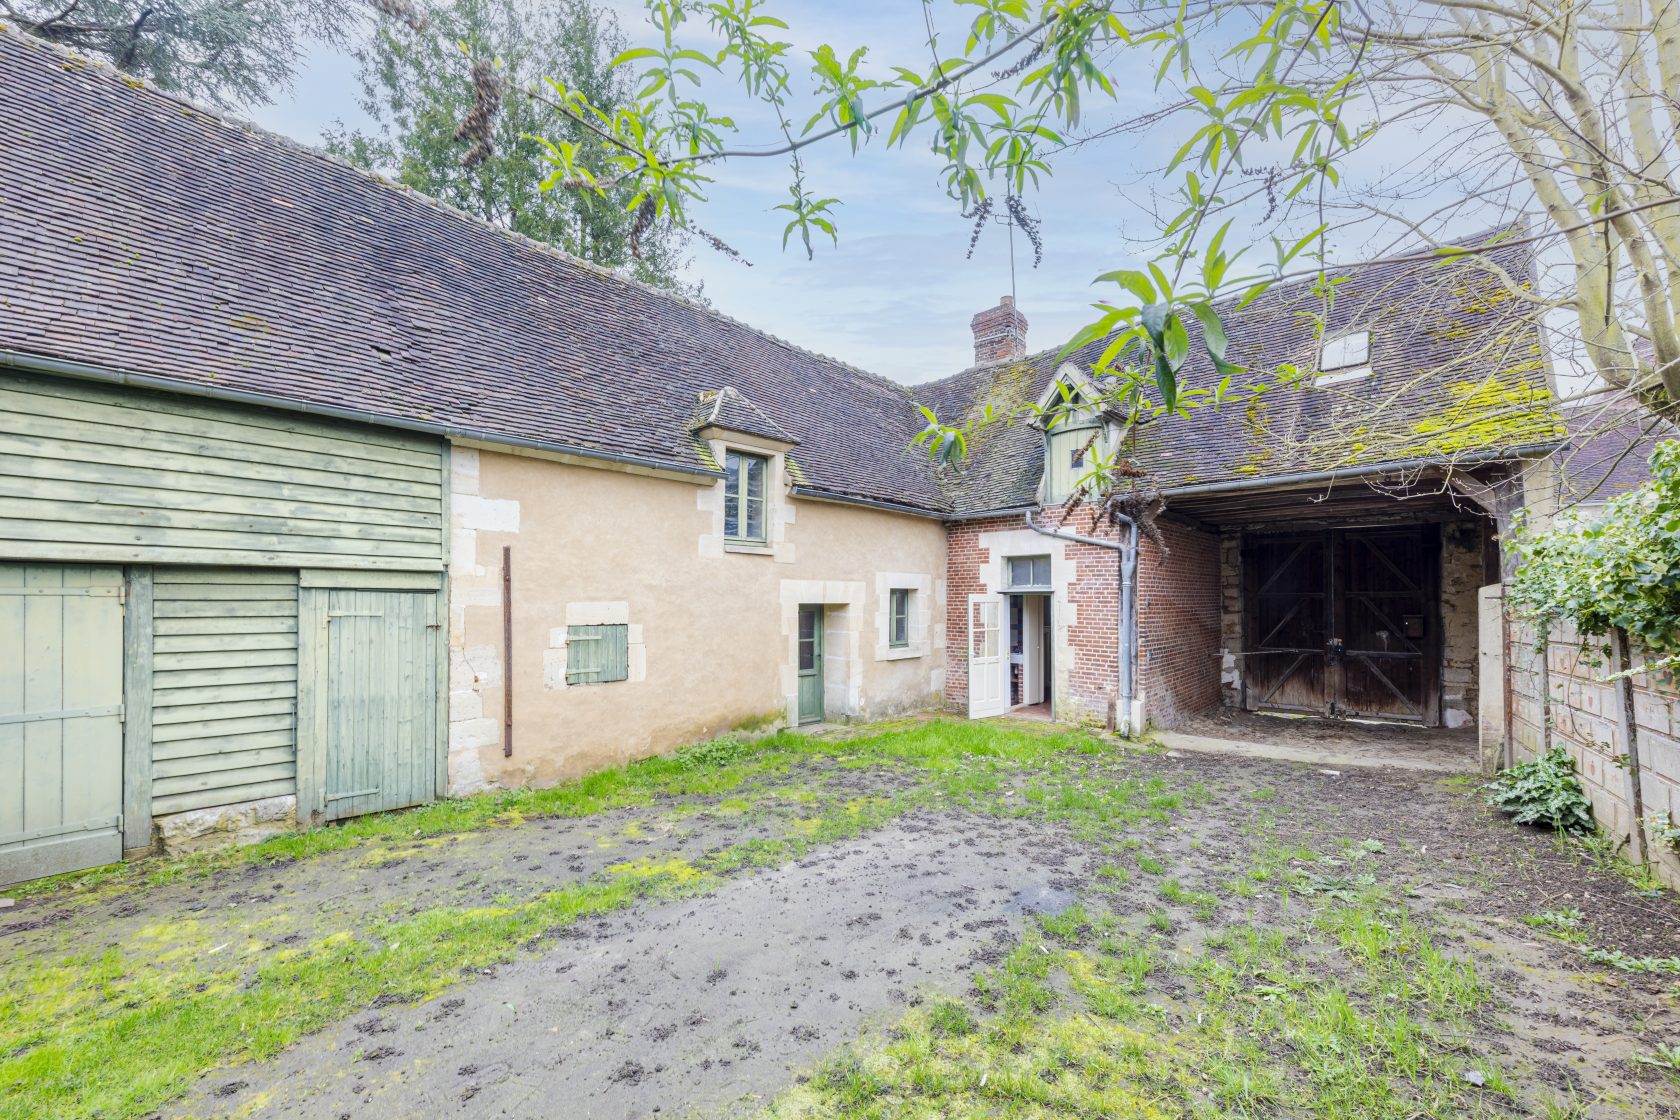 Mansion with its wash house and outbuildings near Noailles